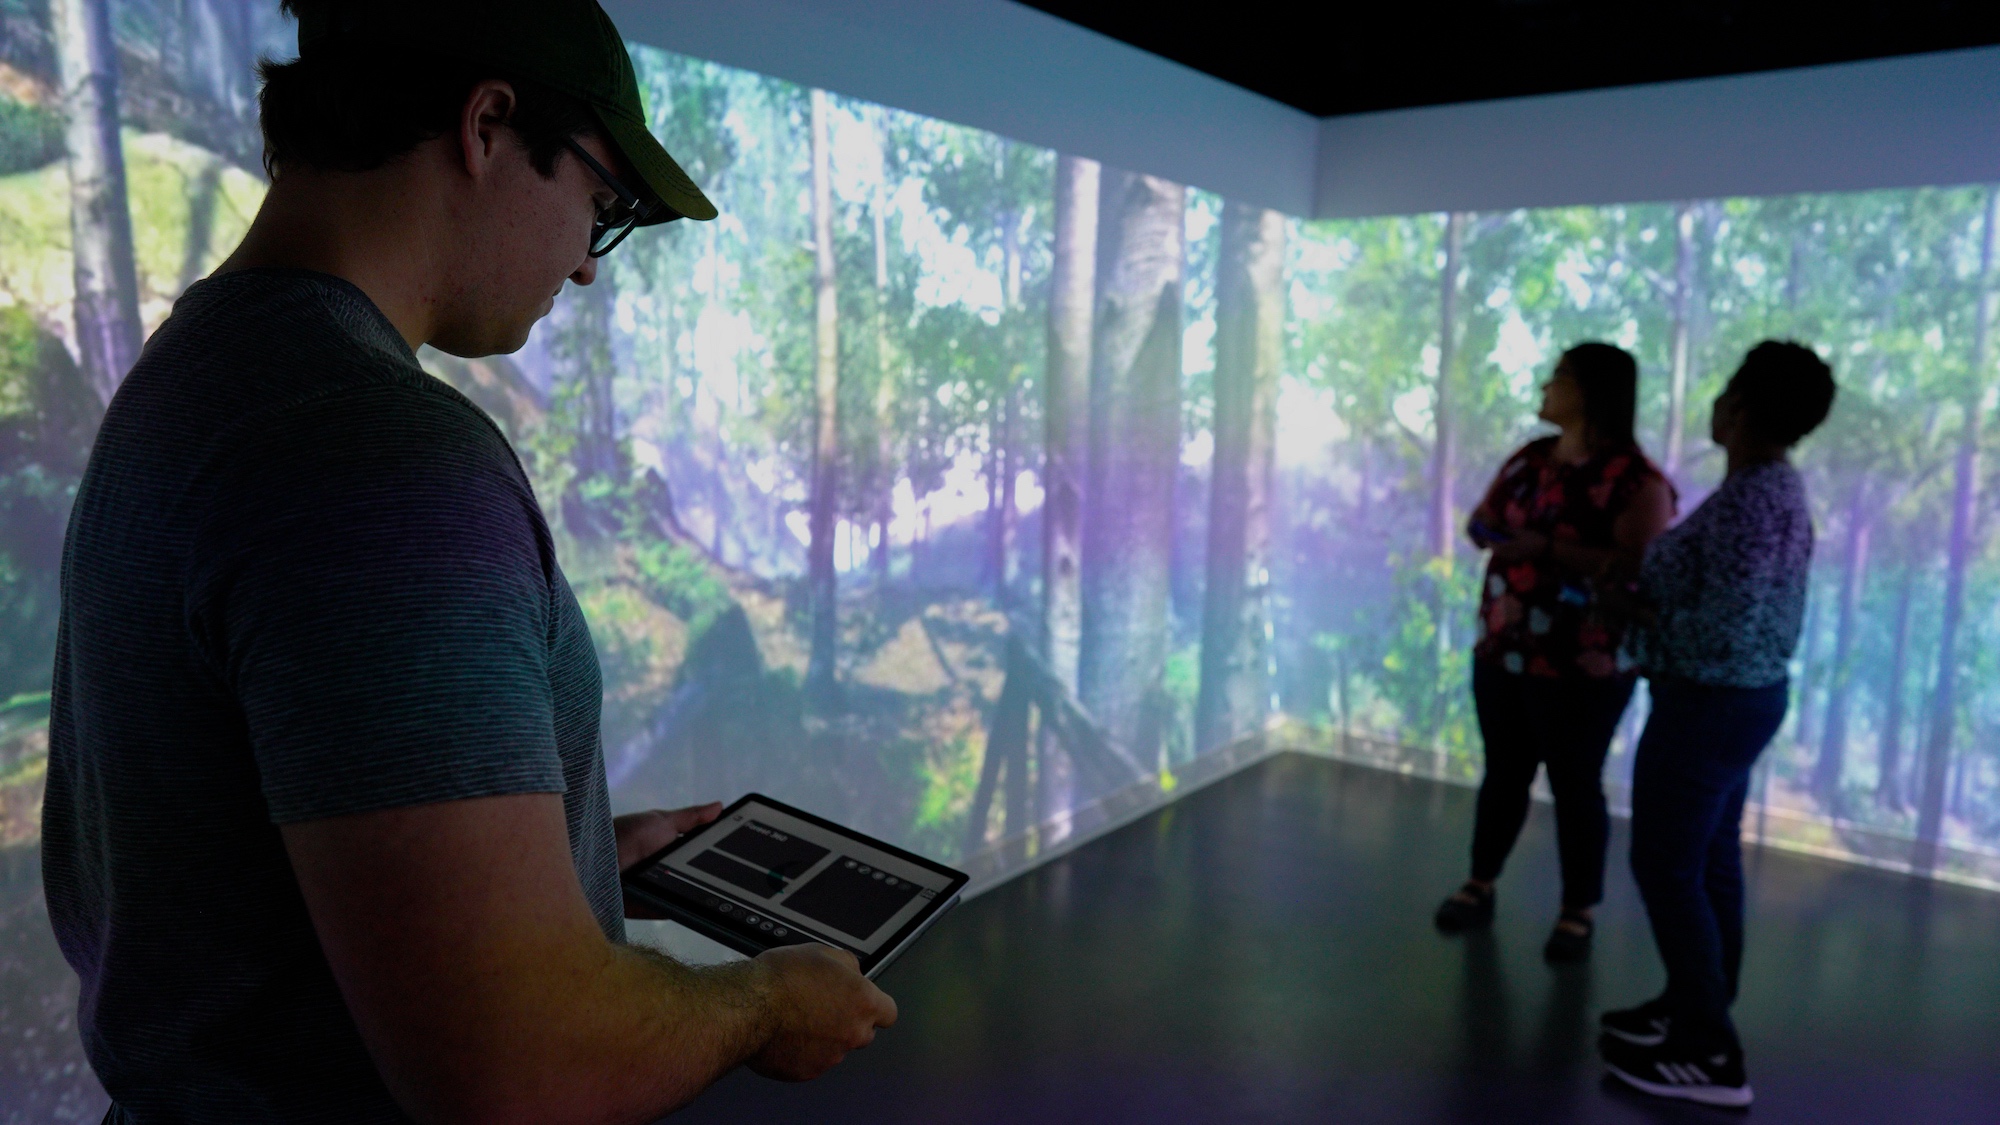 UC Davis graduate student in shadow uses a tablet to control special effects of the room with 360 degree video surrounding him.